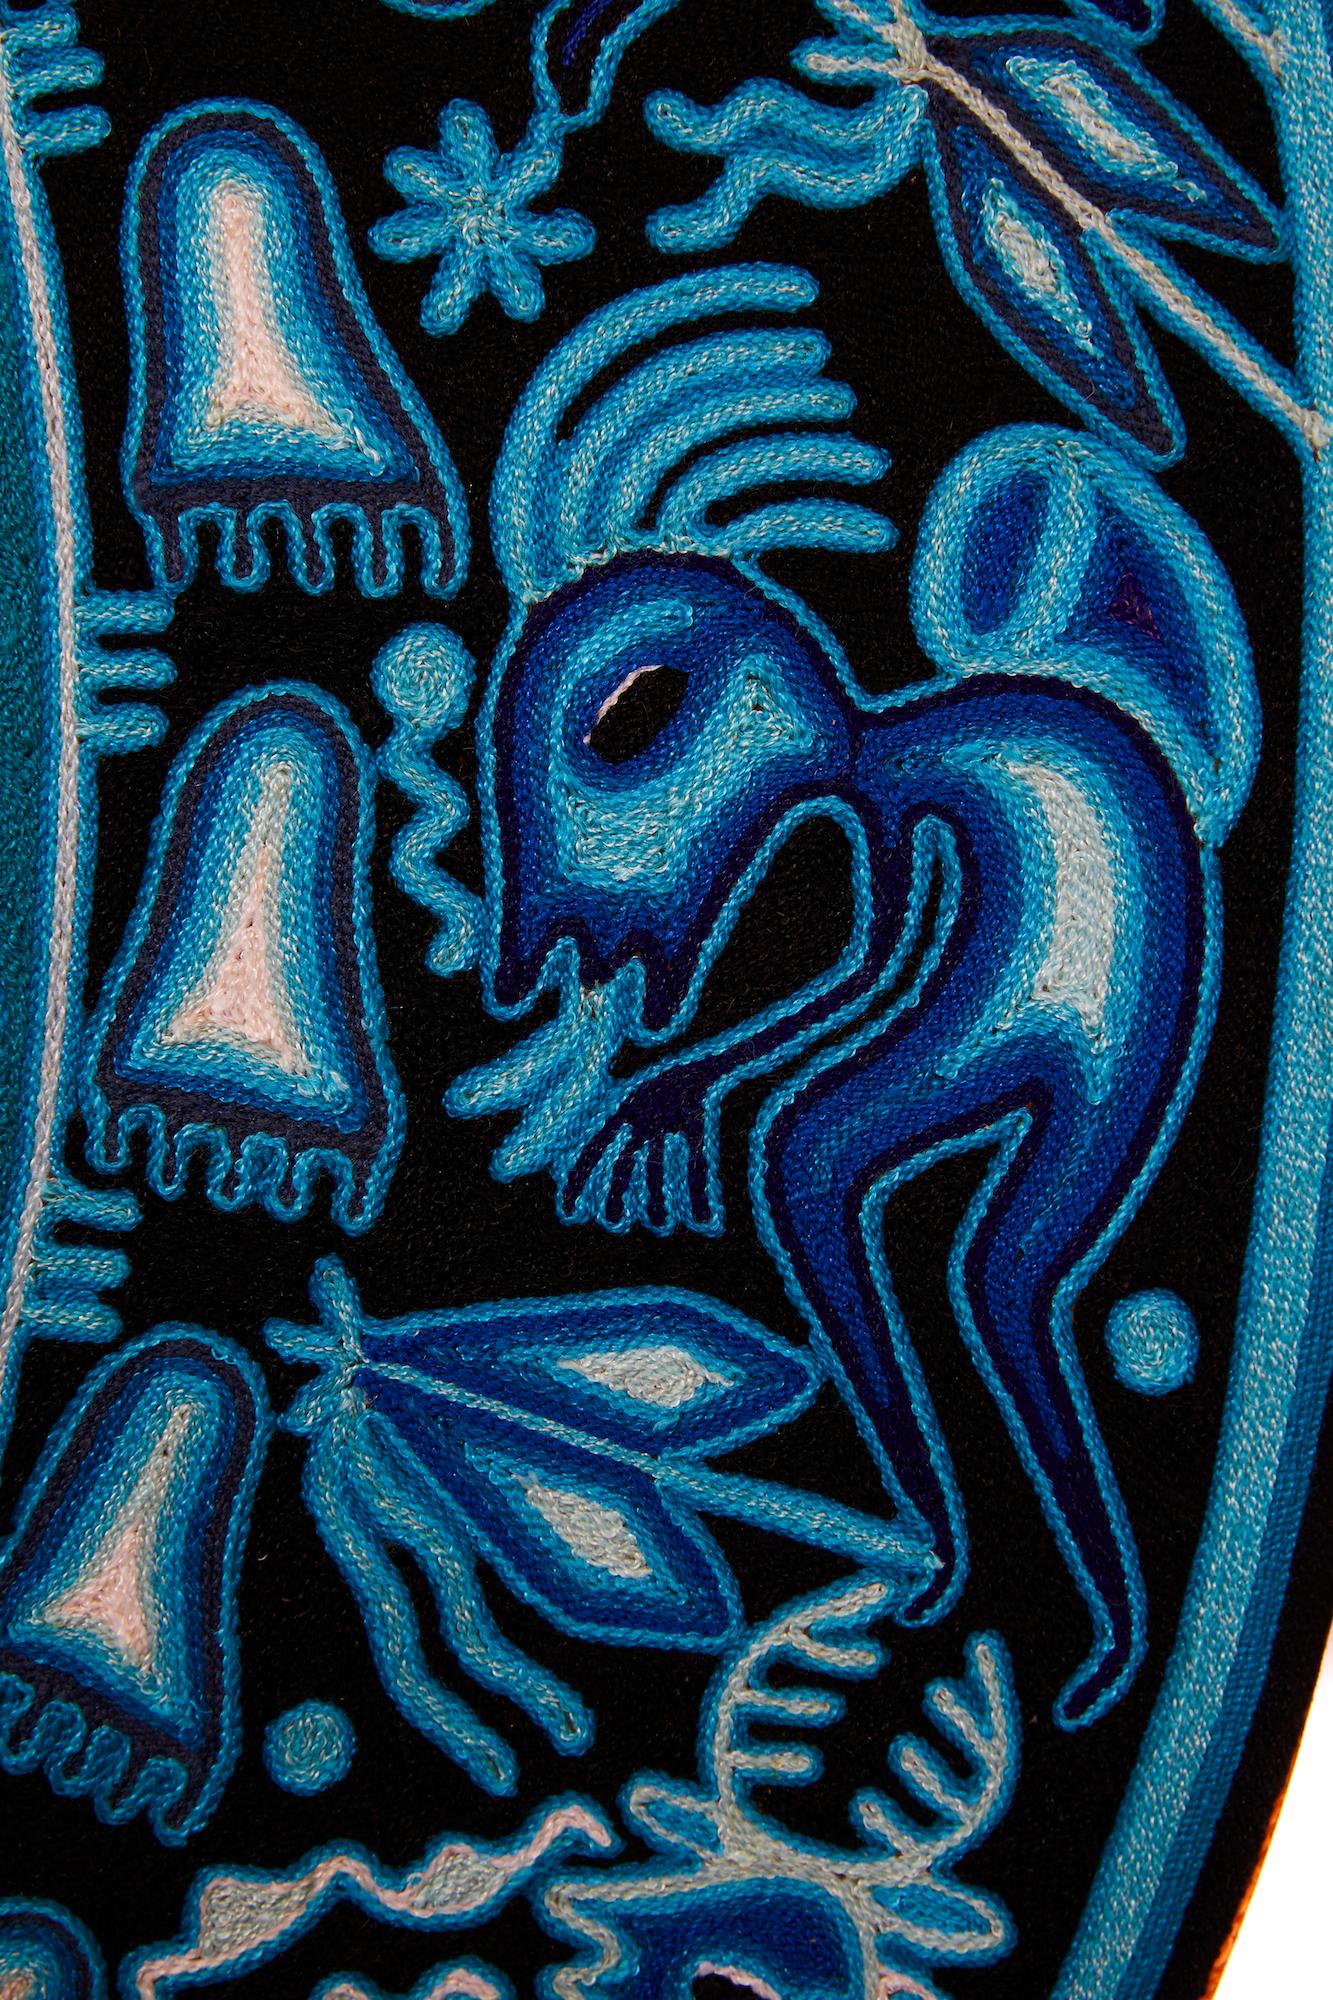 Huichol Indian -  Blue Yarn Painting
This hand-embroidered blue eagle painting is made by Huichol artisans, includes materials such as natural cotton thread, wood, natural glue, and months of work.
At Cactus Fine Art, we offer an exclusive selection